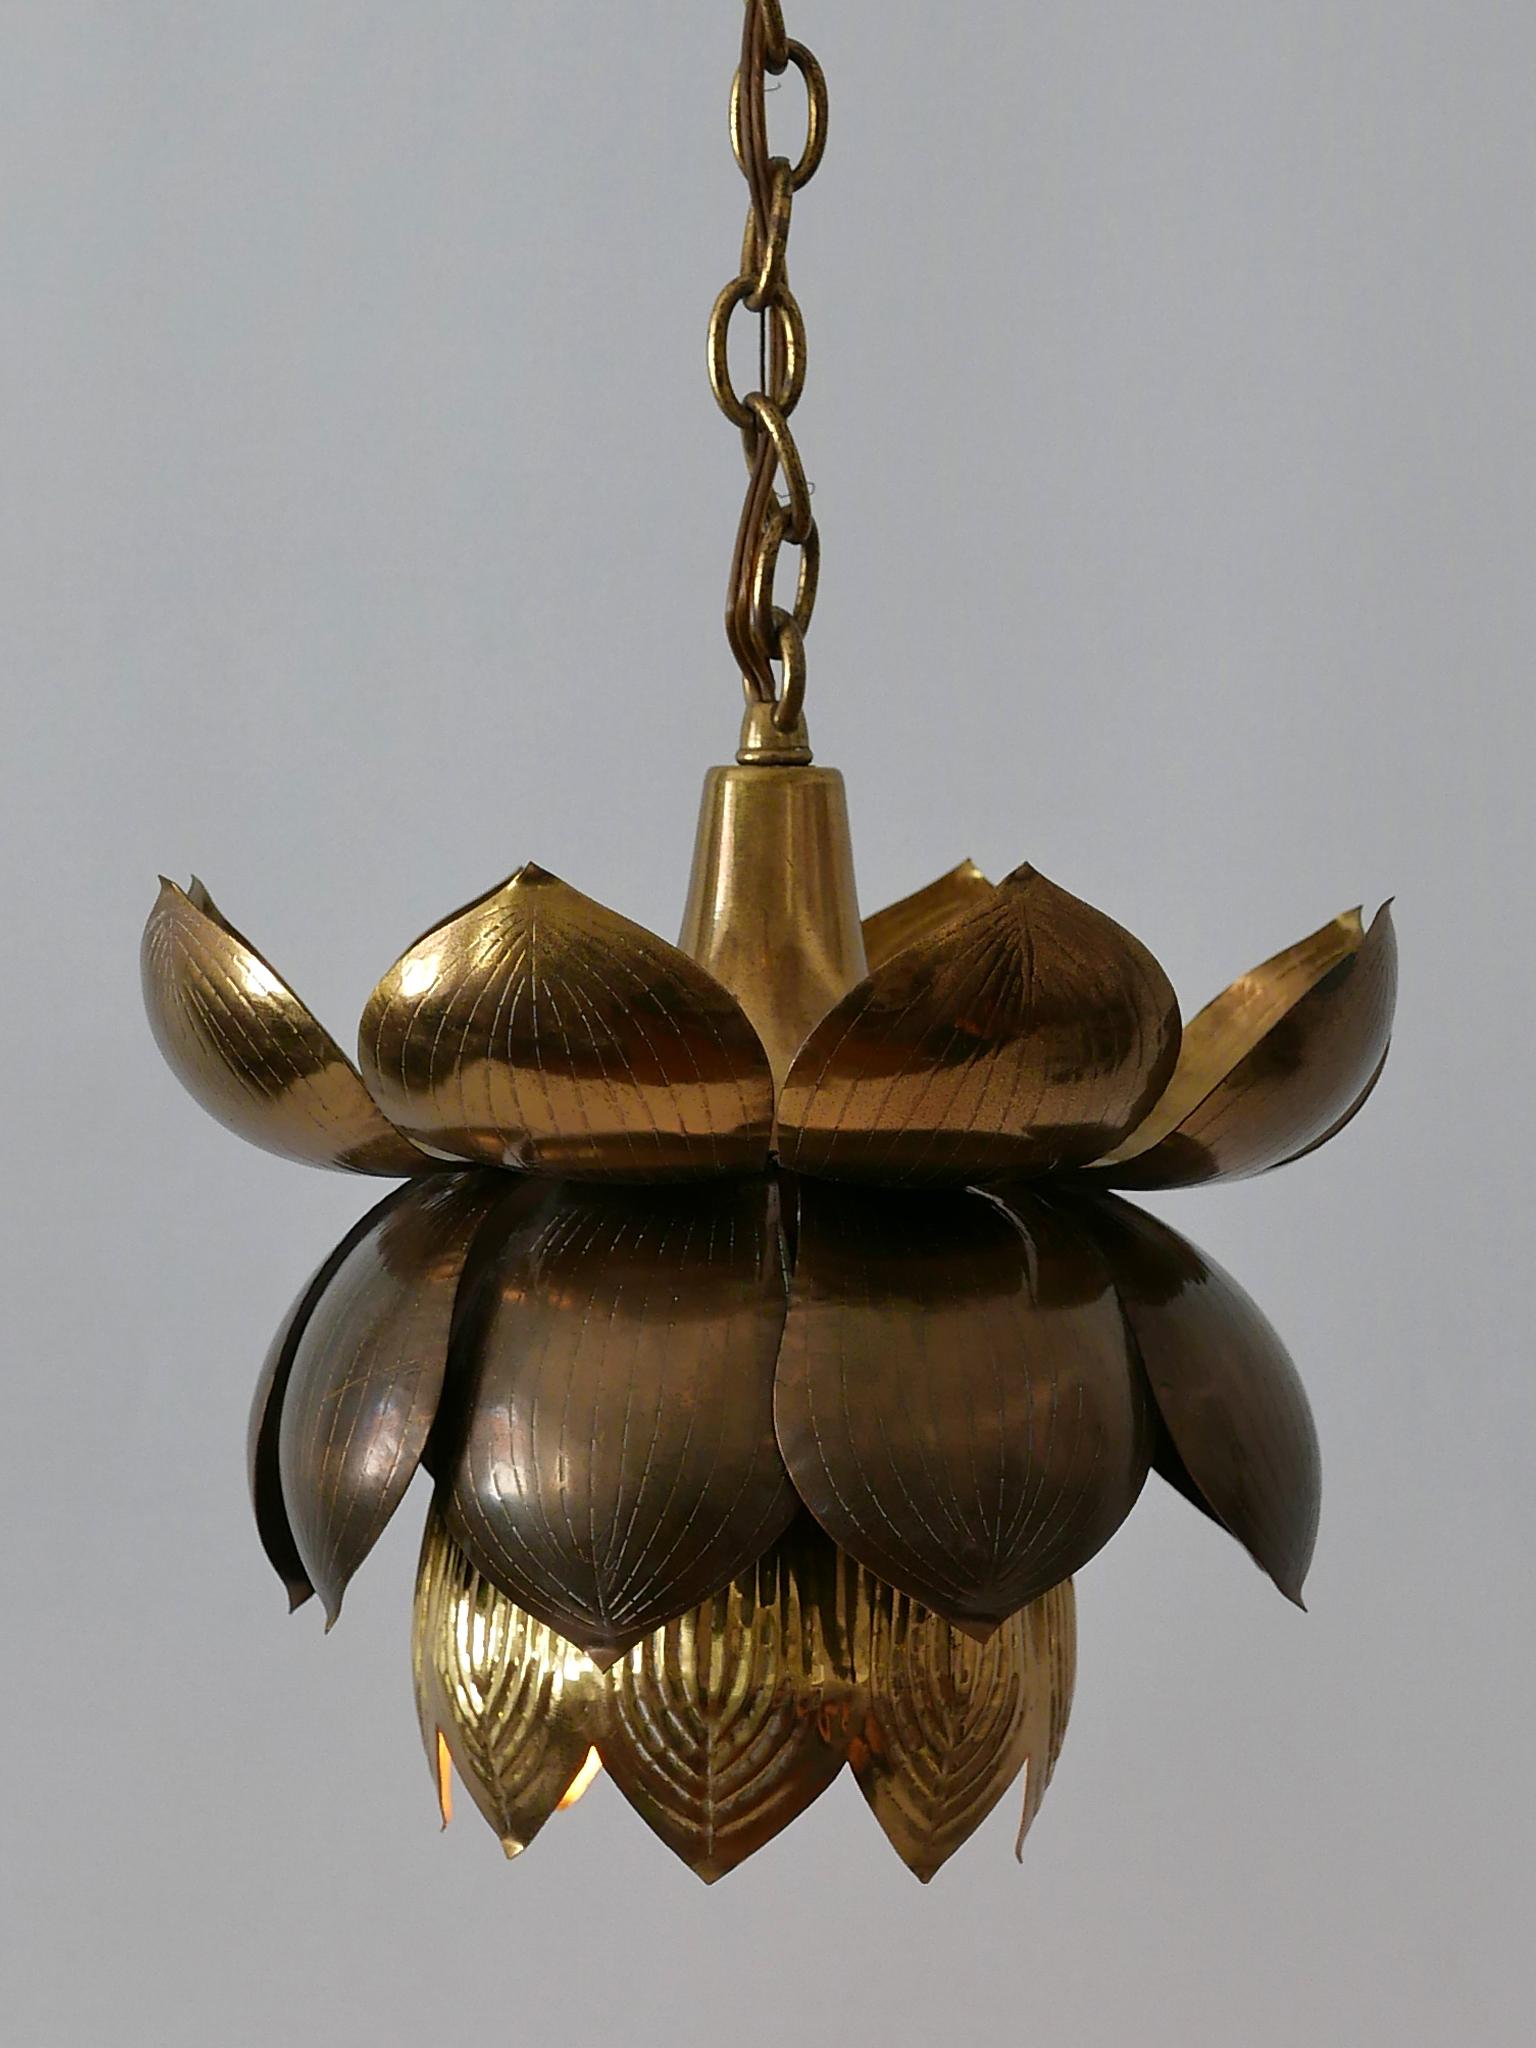 Lovely Mid-Century Modern brass pendant lamp or hanging light 'Lotus'. Manufactured by Feldman Lighting, Los Angeles, USA, 1960s. Makers label to the canopy.

Executed in brass, the lamp needs 1 x E27 / E26 Edison screw fit bulb, is wired. It runs